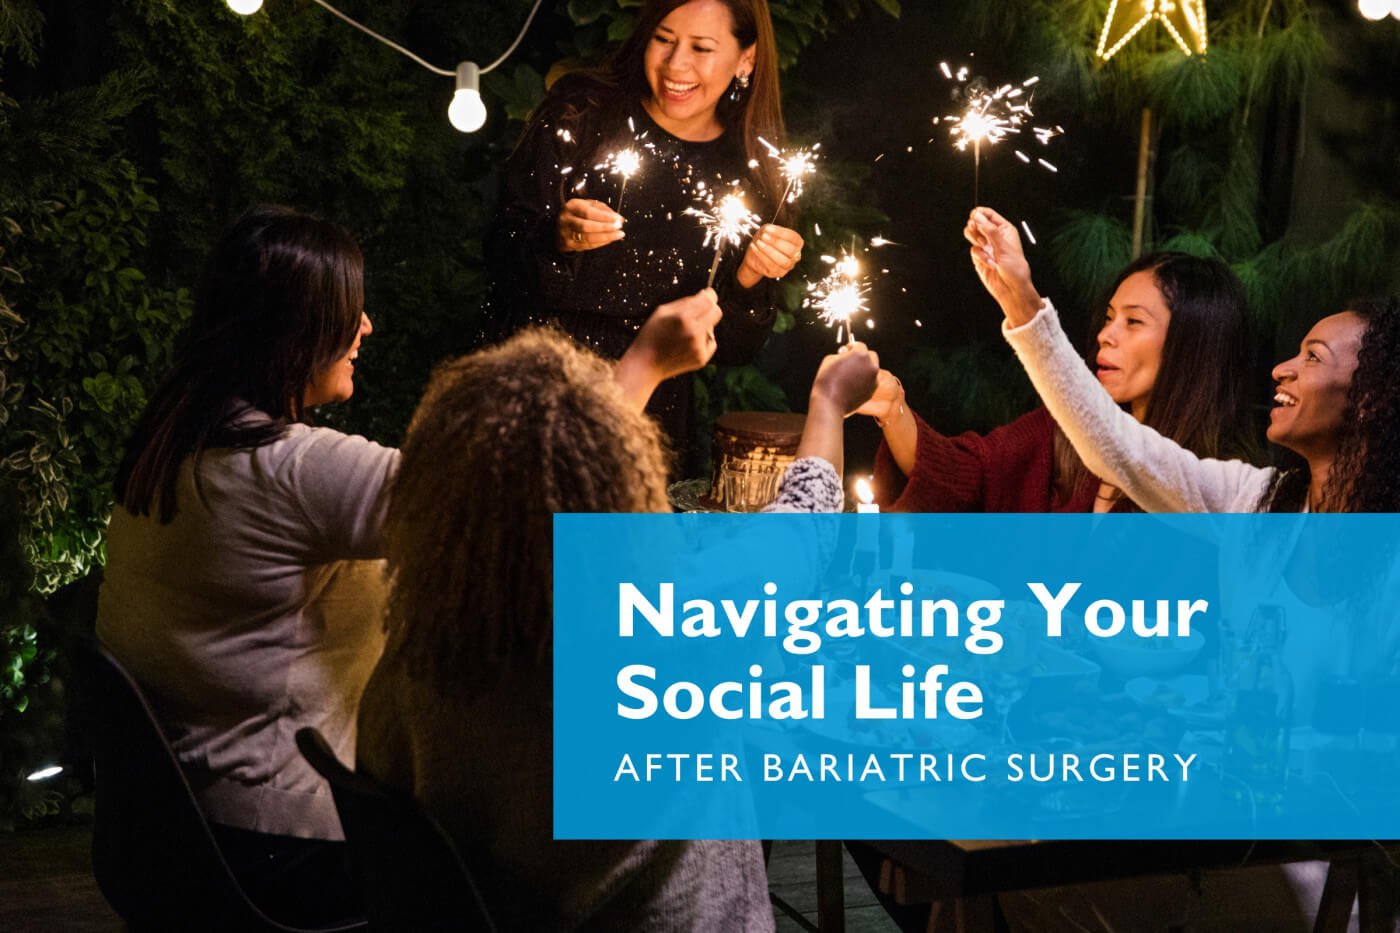 Friends sitting around a table at night with sparklers | Navigating Your Social Life After Bariatric Surgery article by Celebrate Vitamins